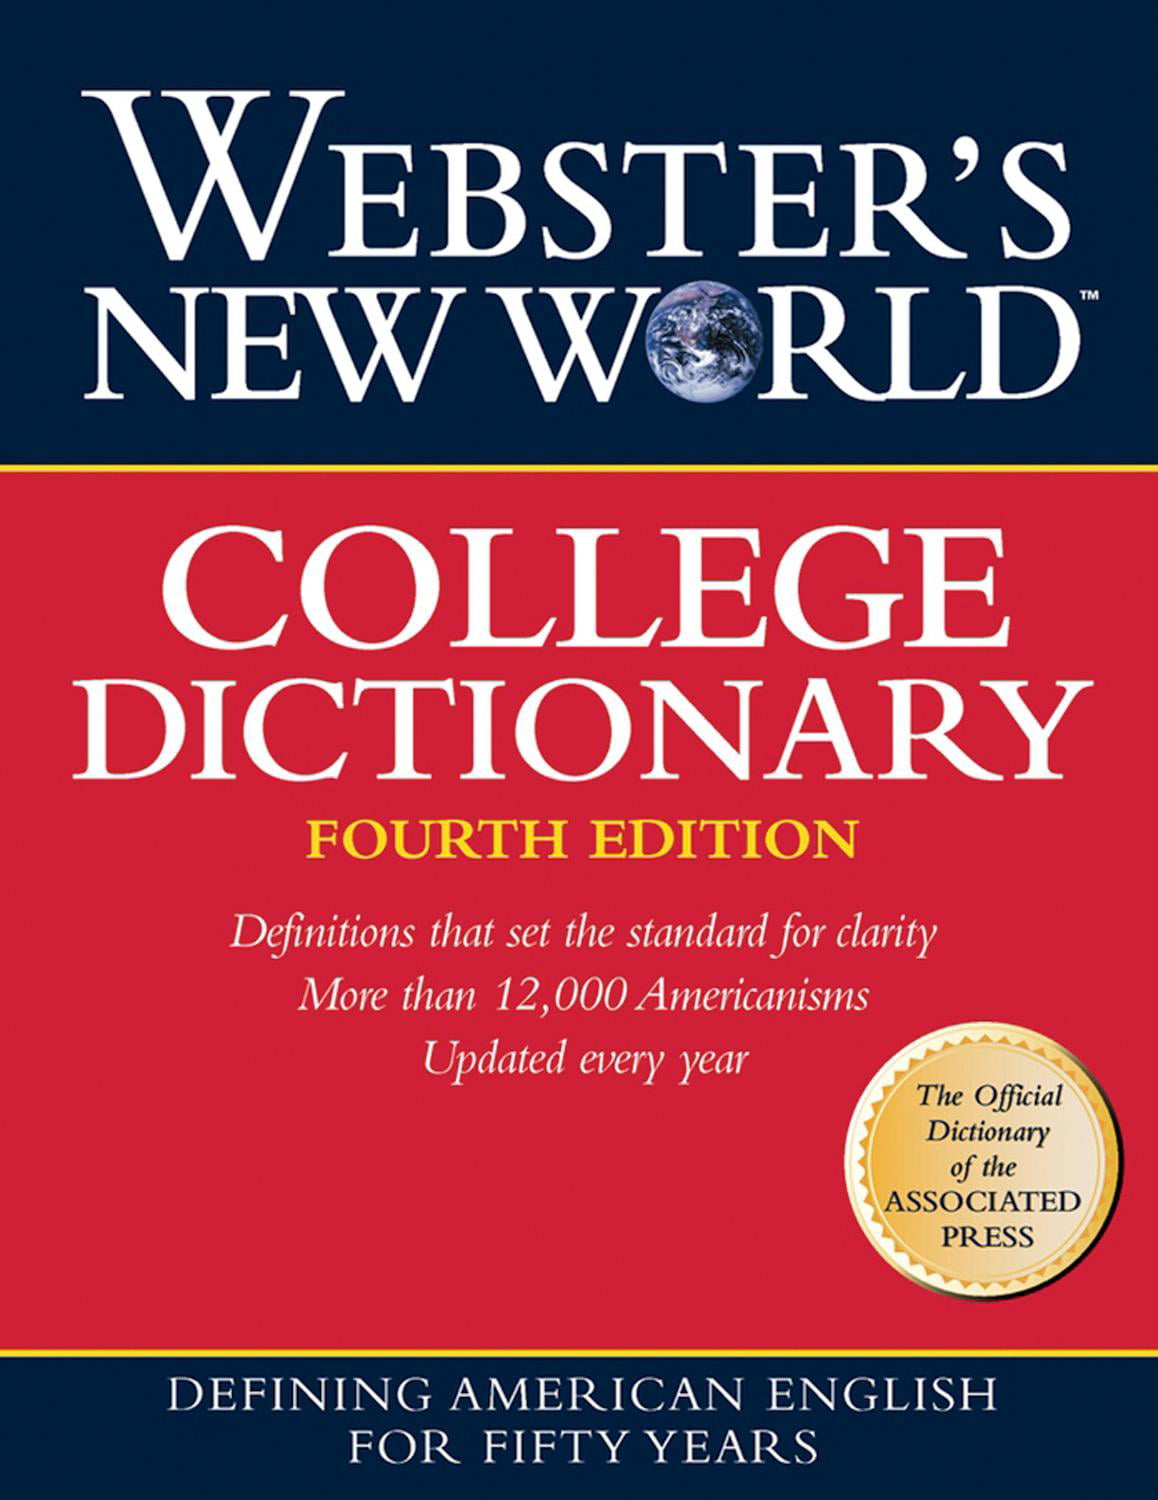 webster's dictionary essay